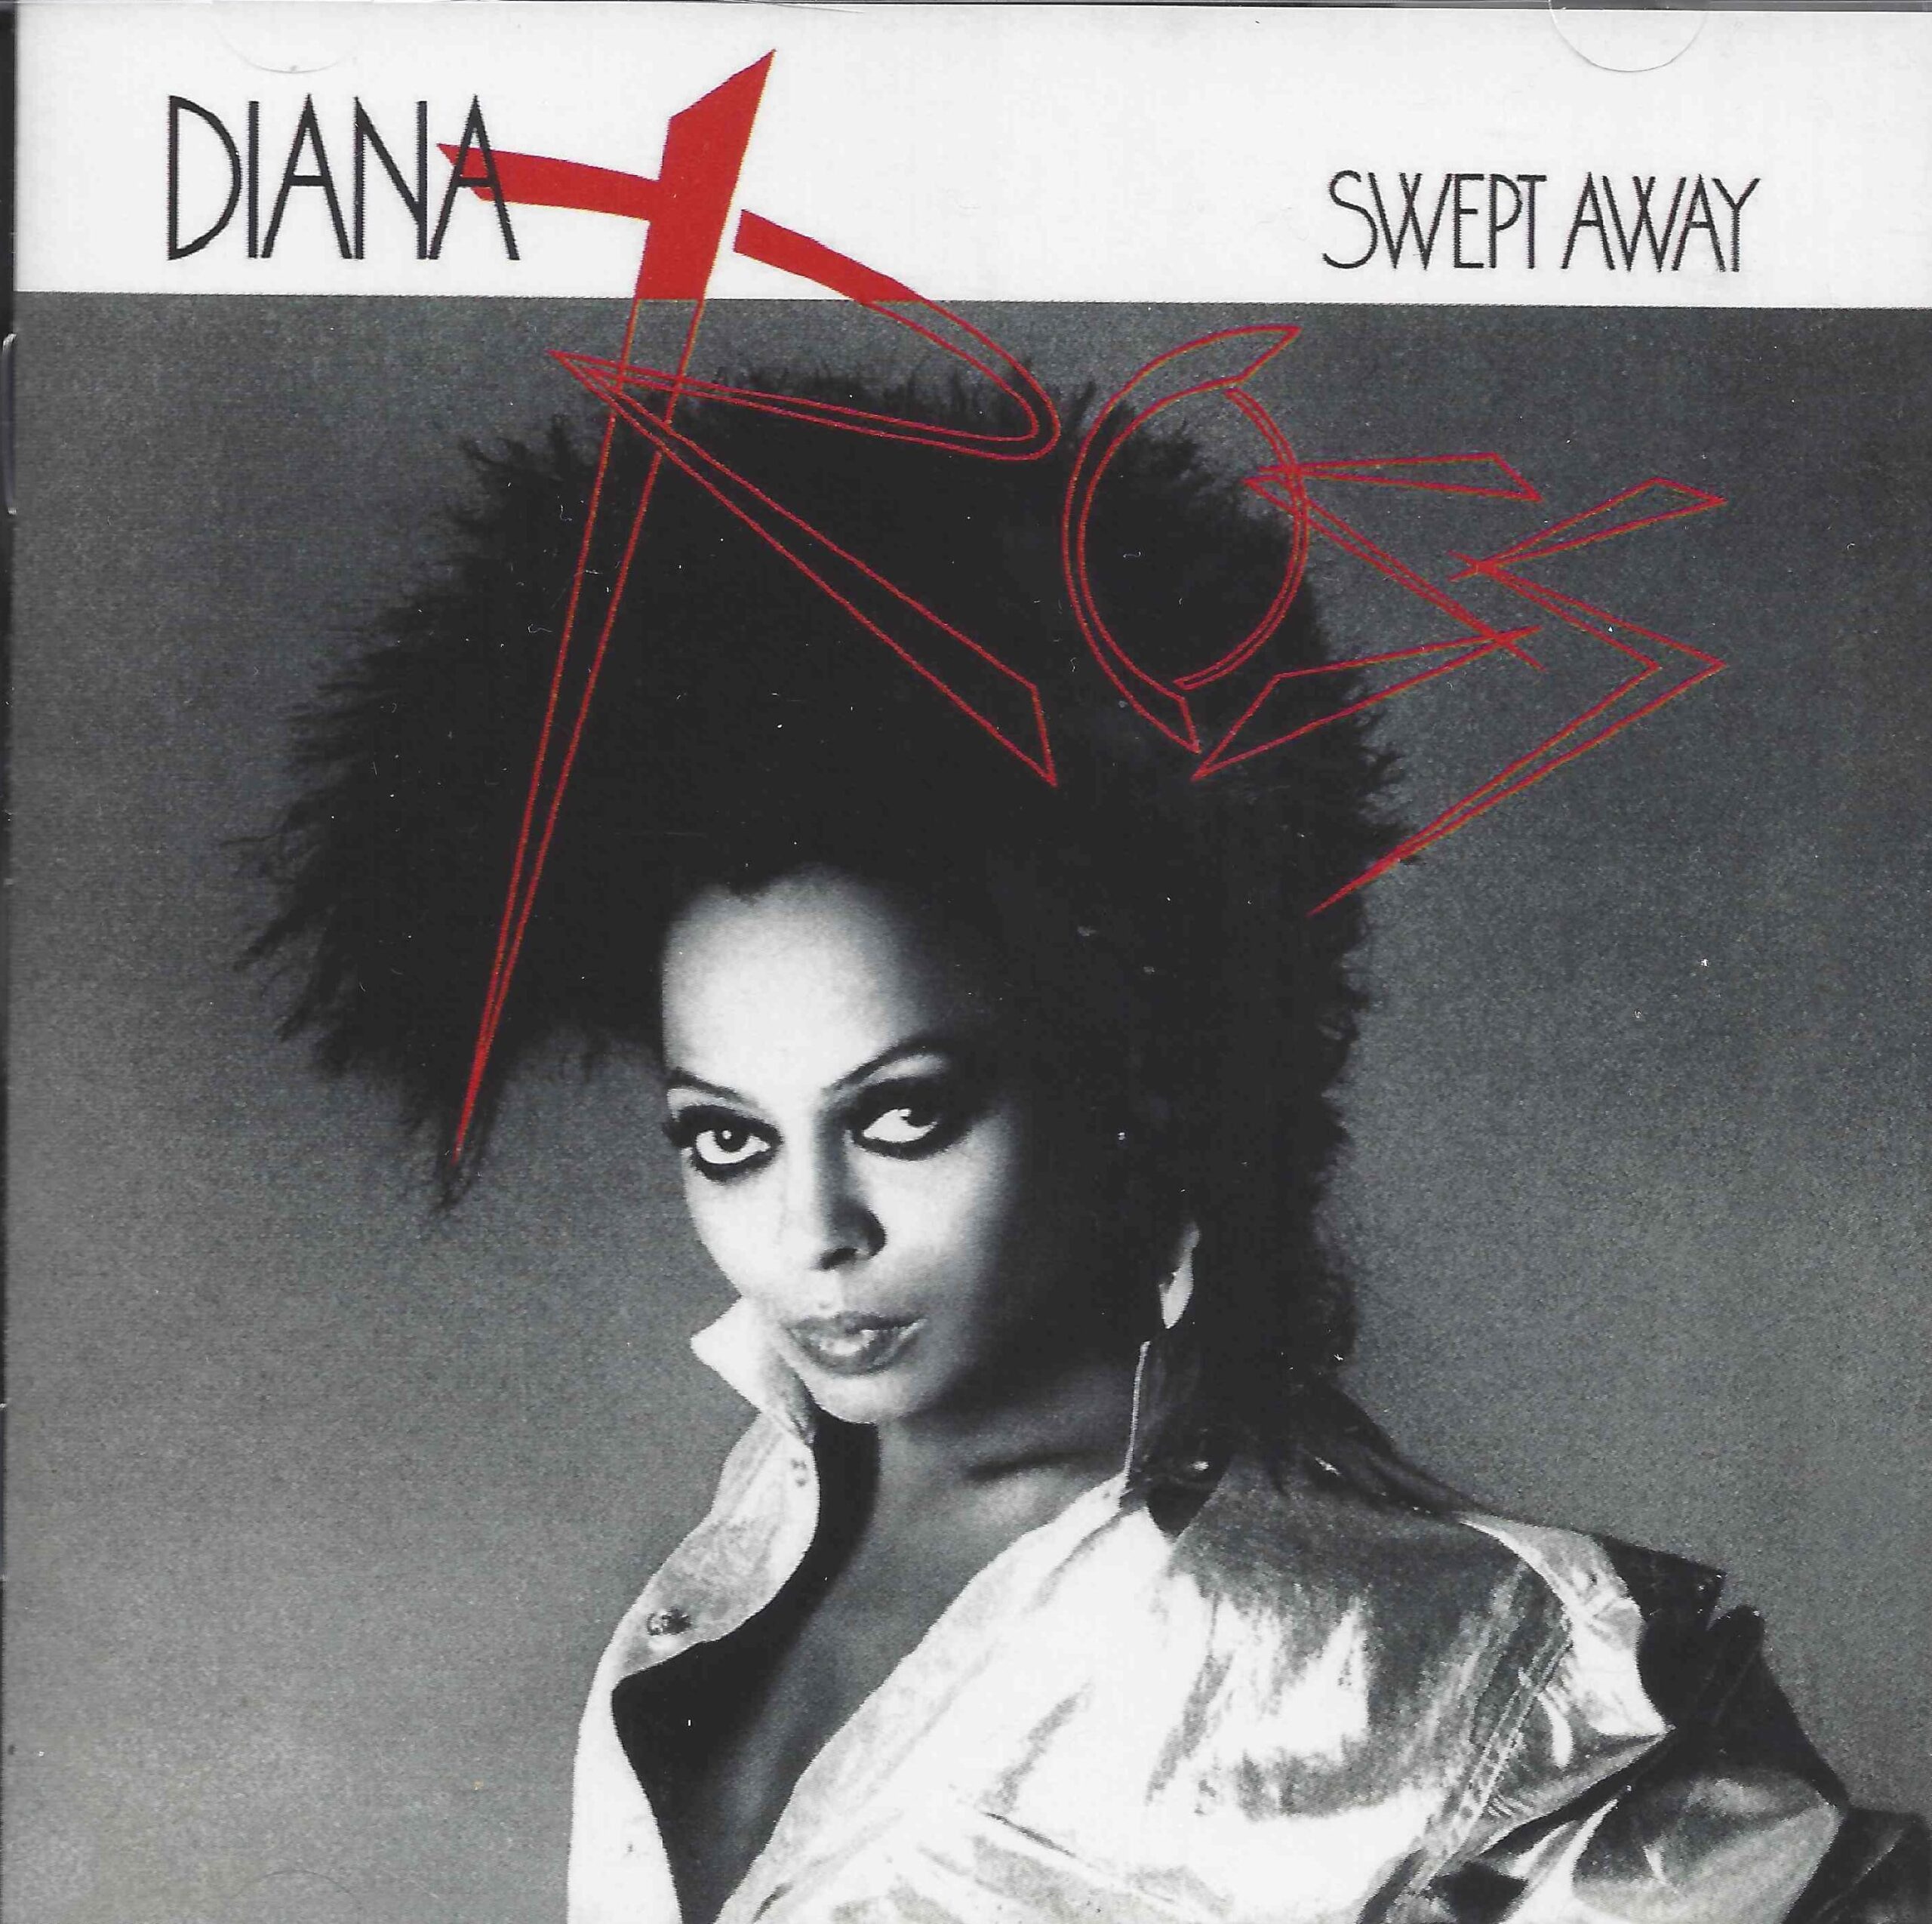 Diana Ross - Swept Away (2 CD Deluxe Edition)